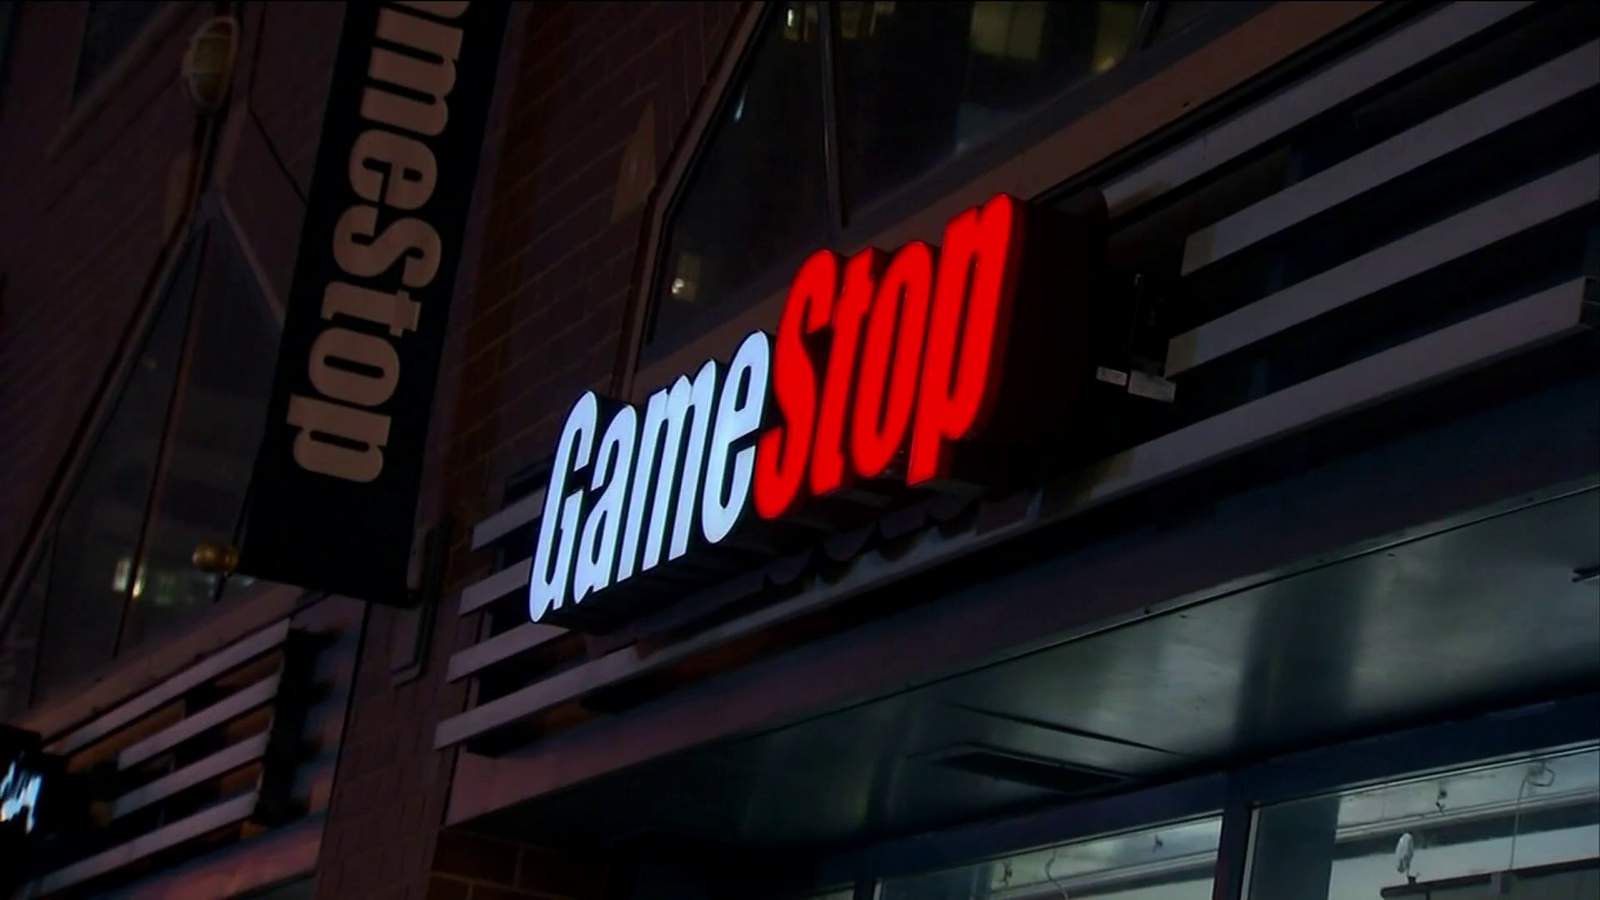 It’s not just GameStop worrying Wall Street about a bubble